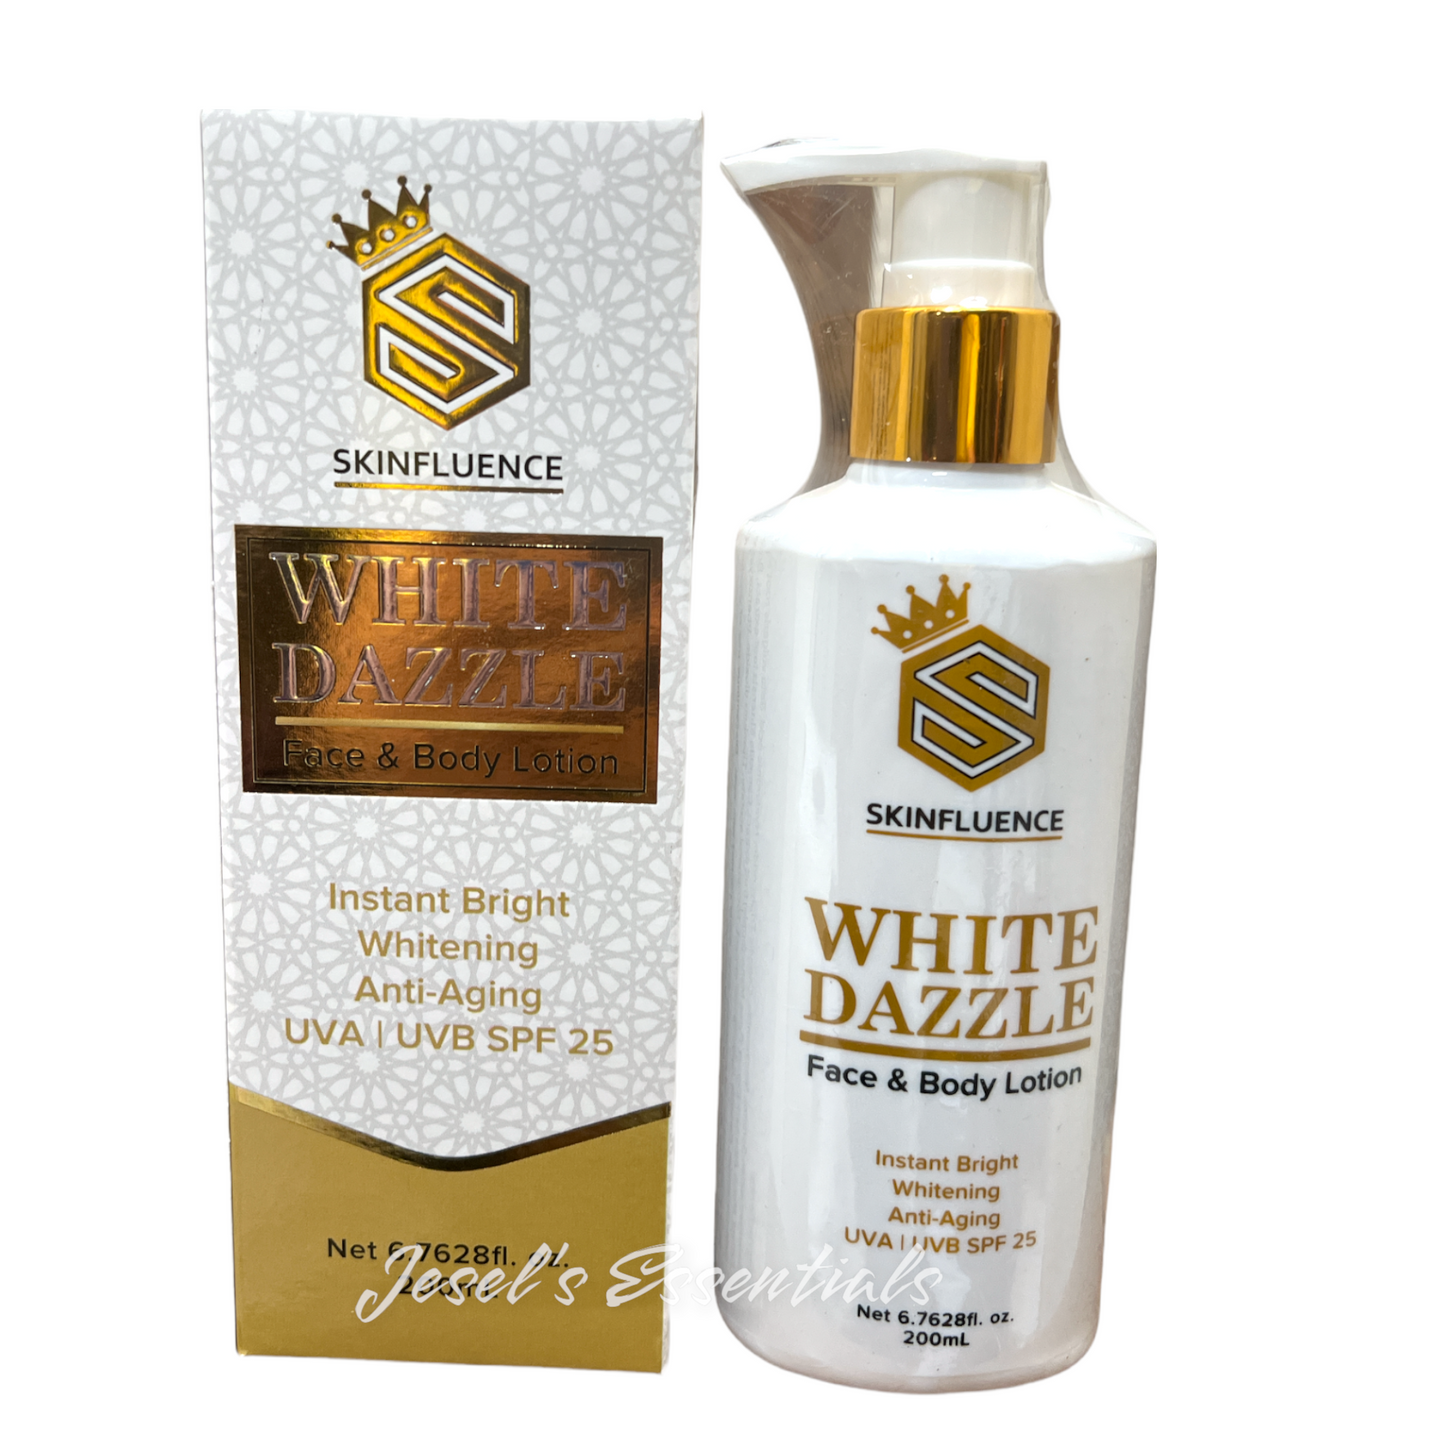 Skinfluence White Dazzle Face & Body Lotion